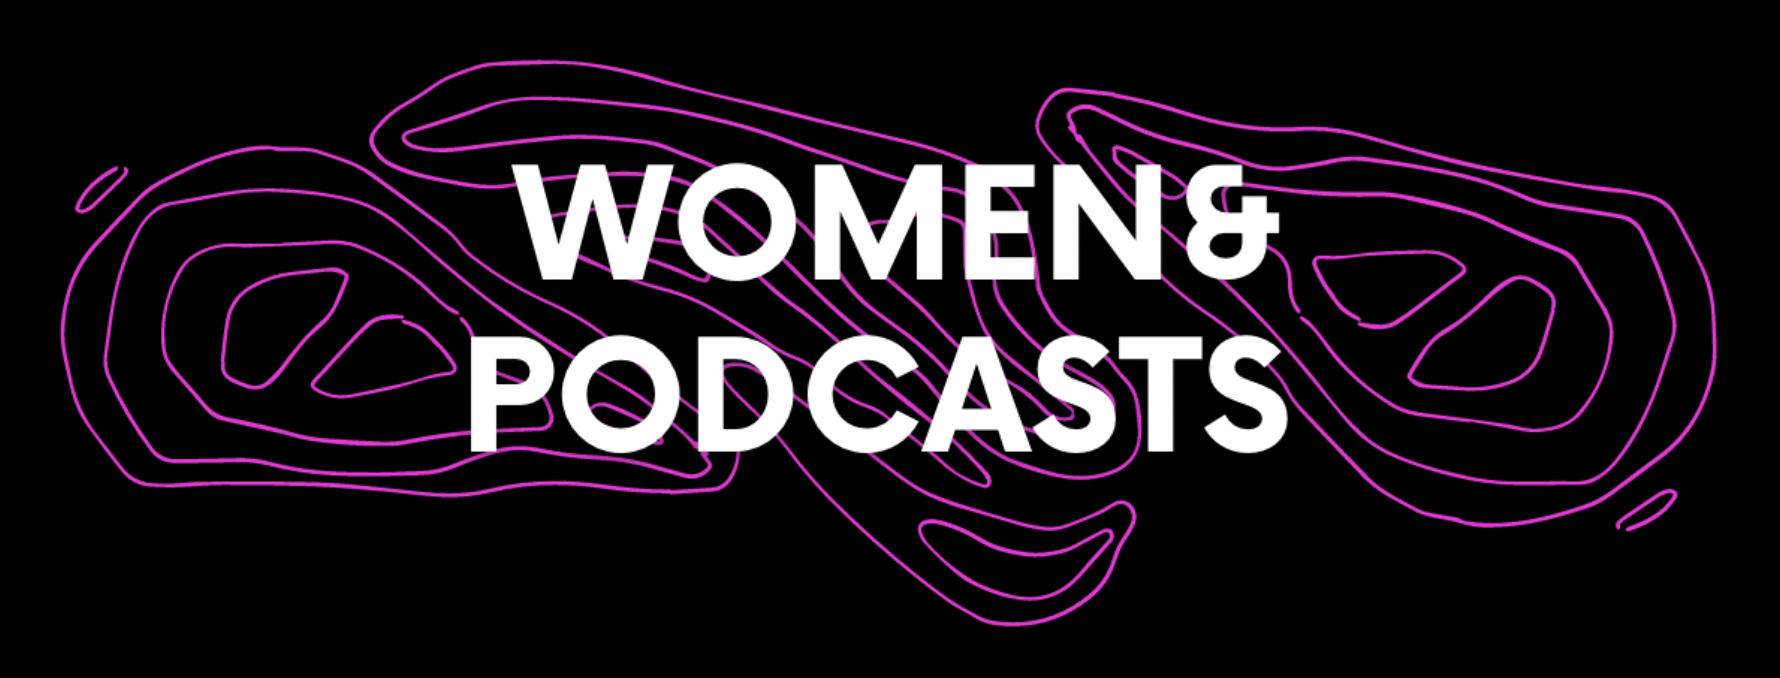 Women&Podcasts veut accompagner les podcasteuses